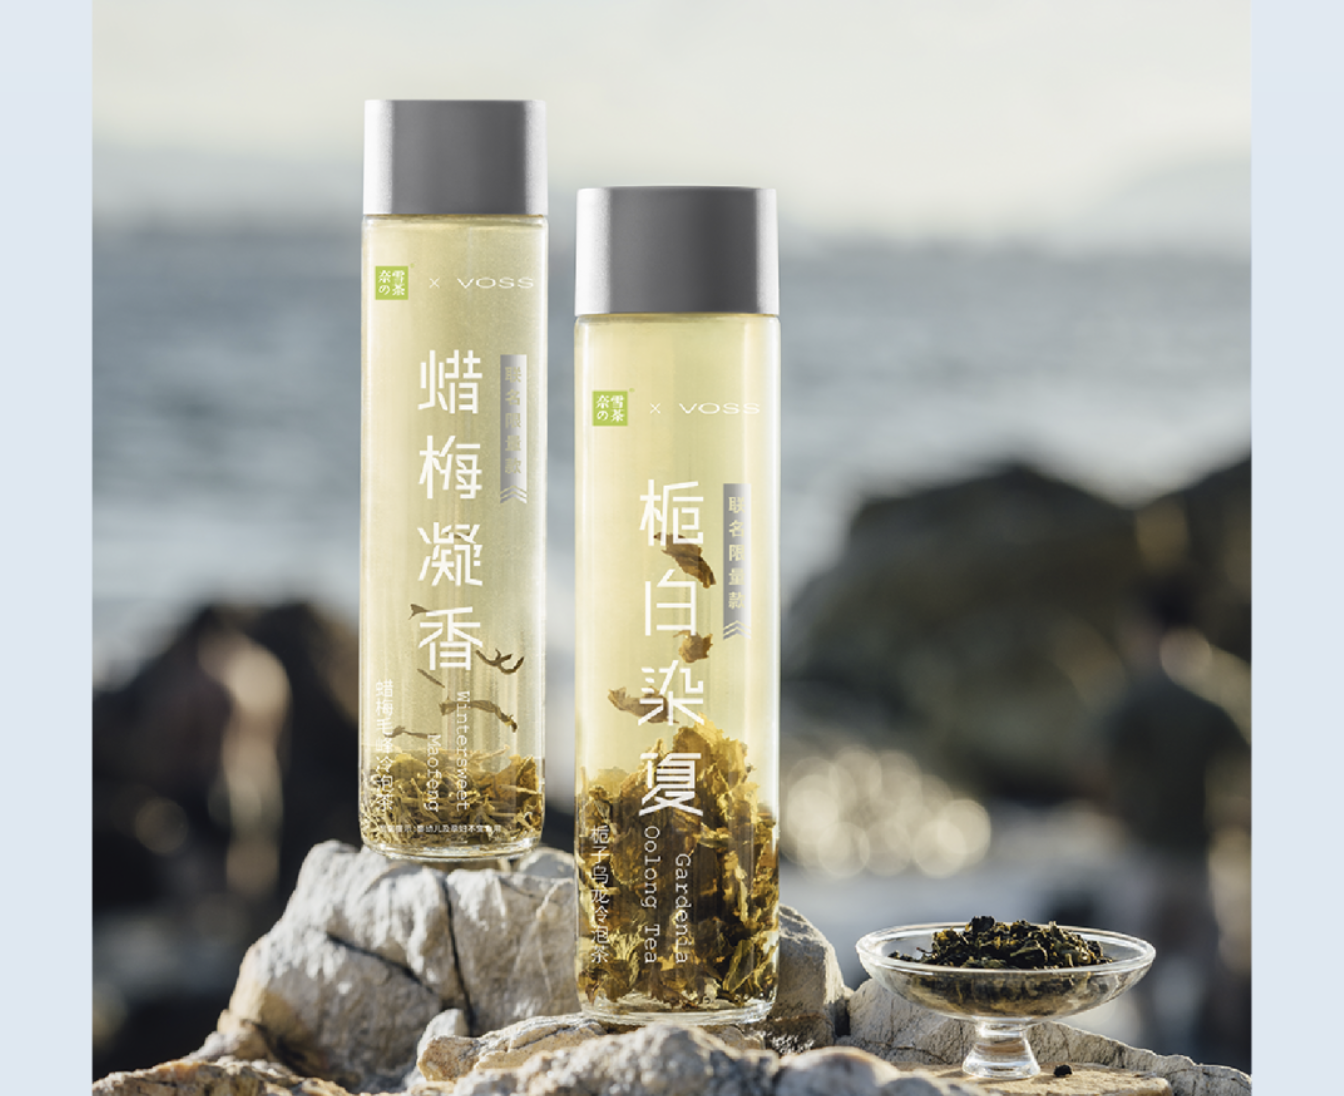 The New Style Milk Tea Brand Naixue’s Tea and VOSS Launched the Joint Name of Cold Brewed Tea.